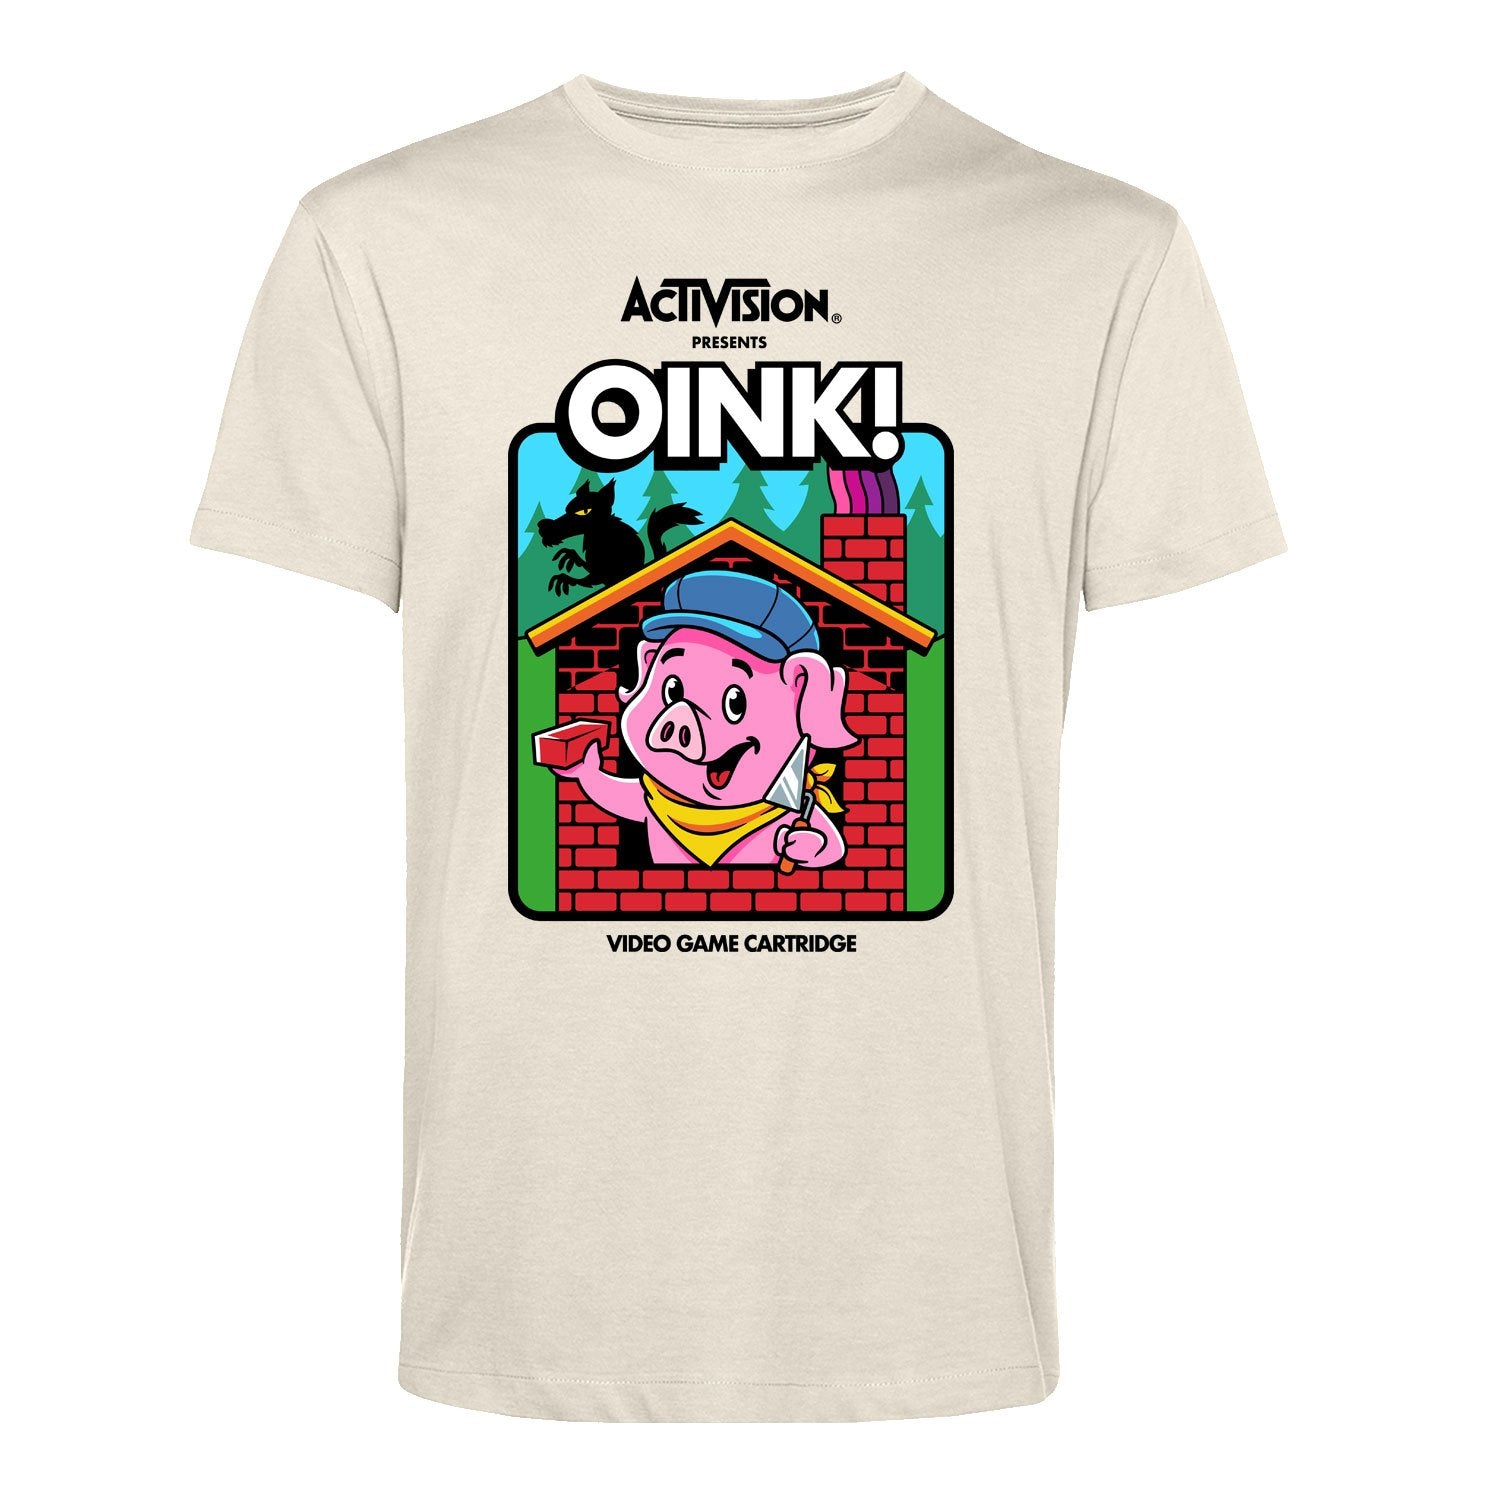 Oink! Activision Unisex T-shirt in Natural Colour Casual Style Fit